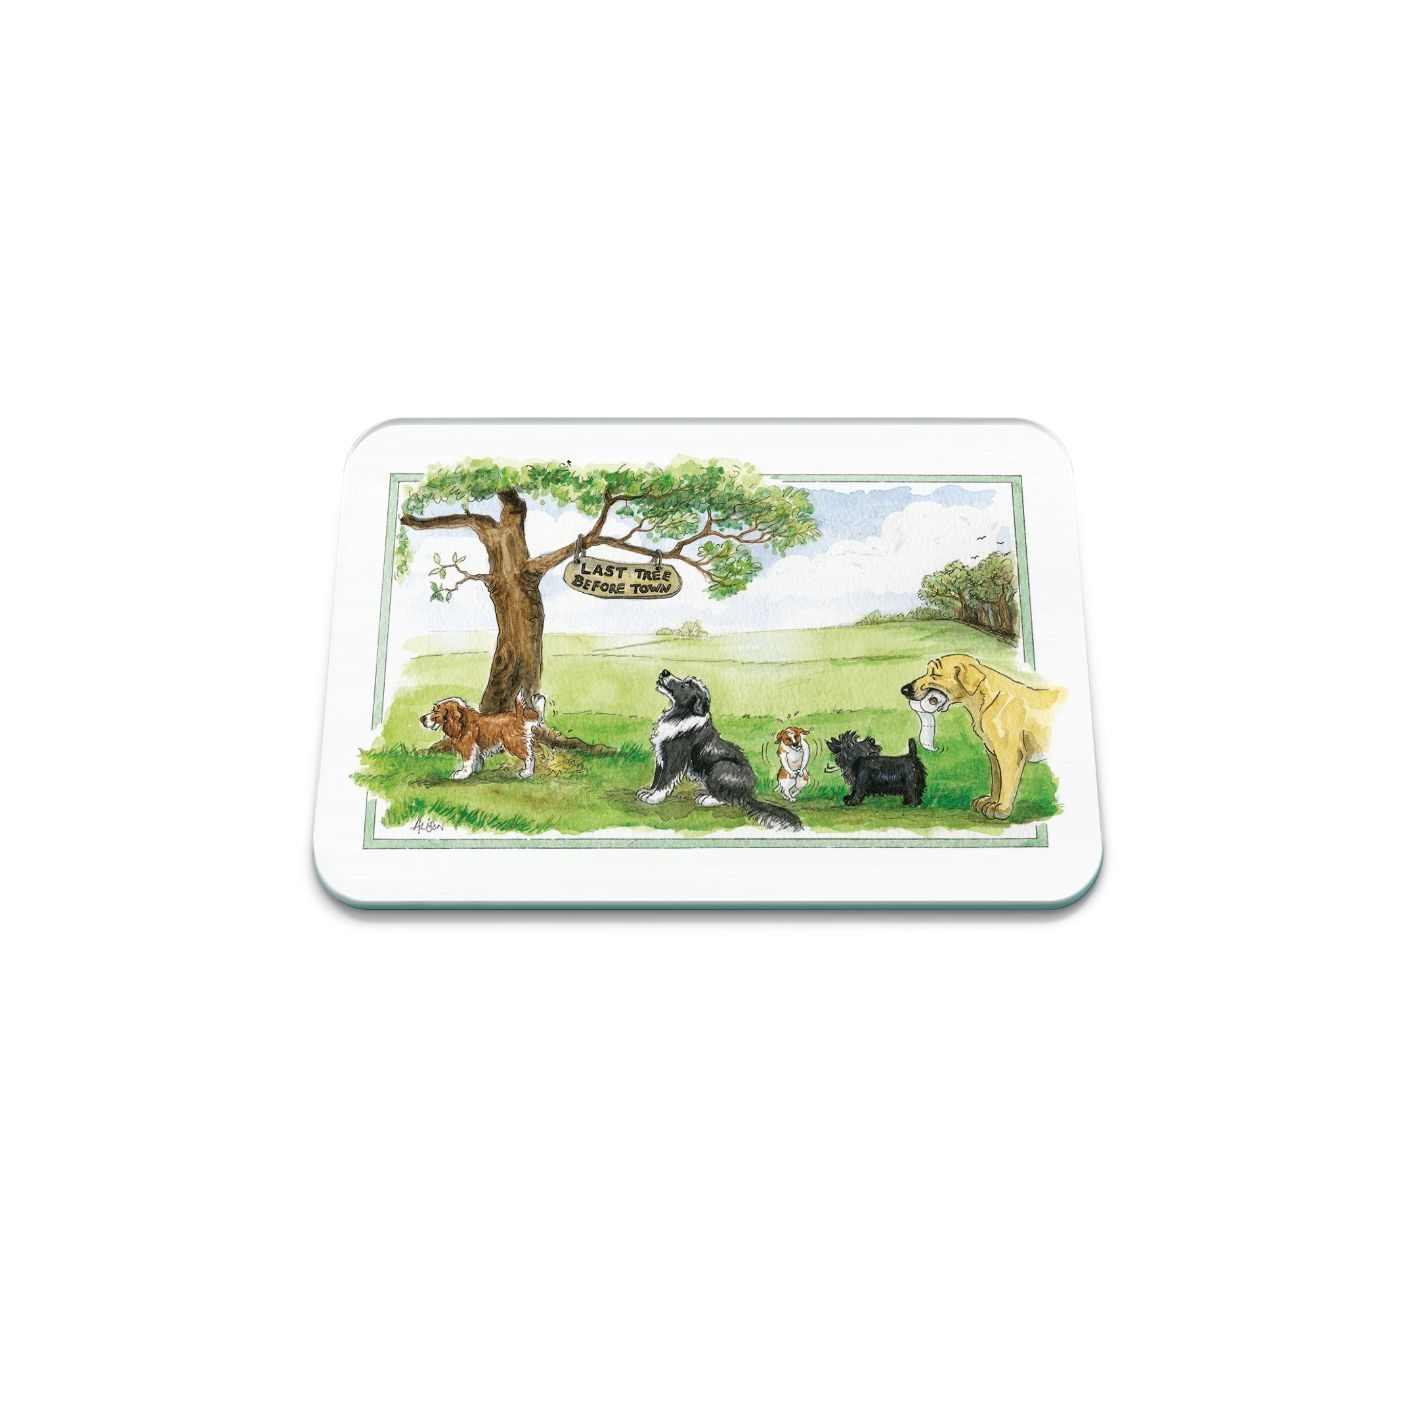 LAST TREE BEFORE TOWN GLASS WORKTOP PROTECTOR SMALL 30X22CM